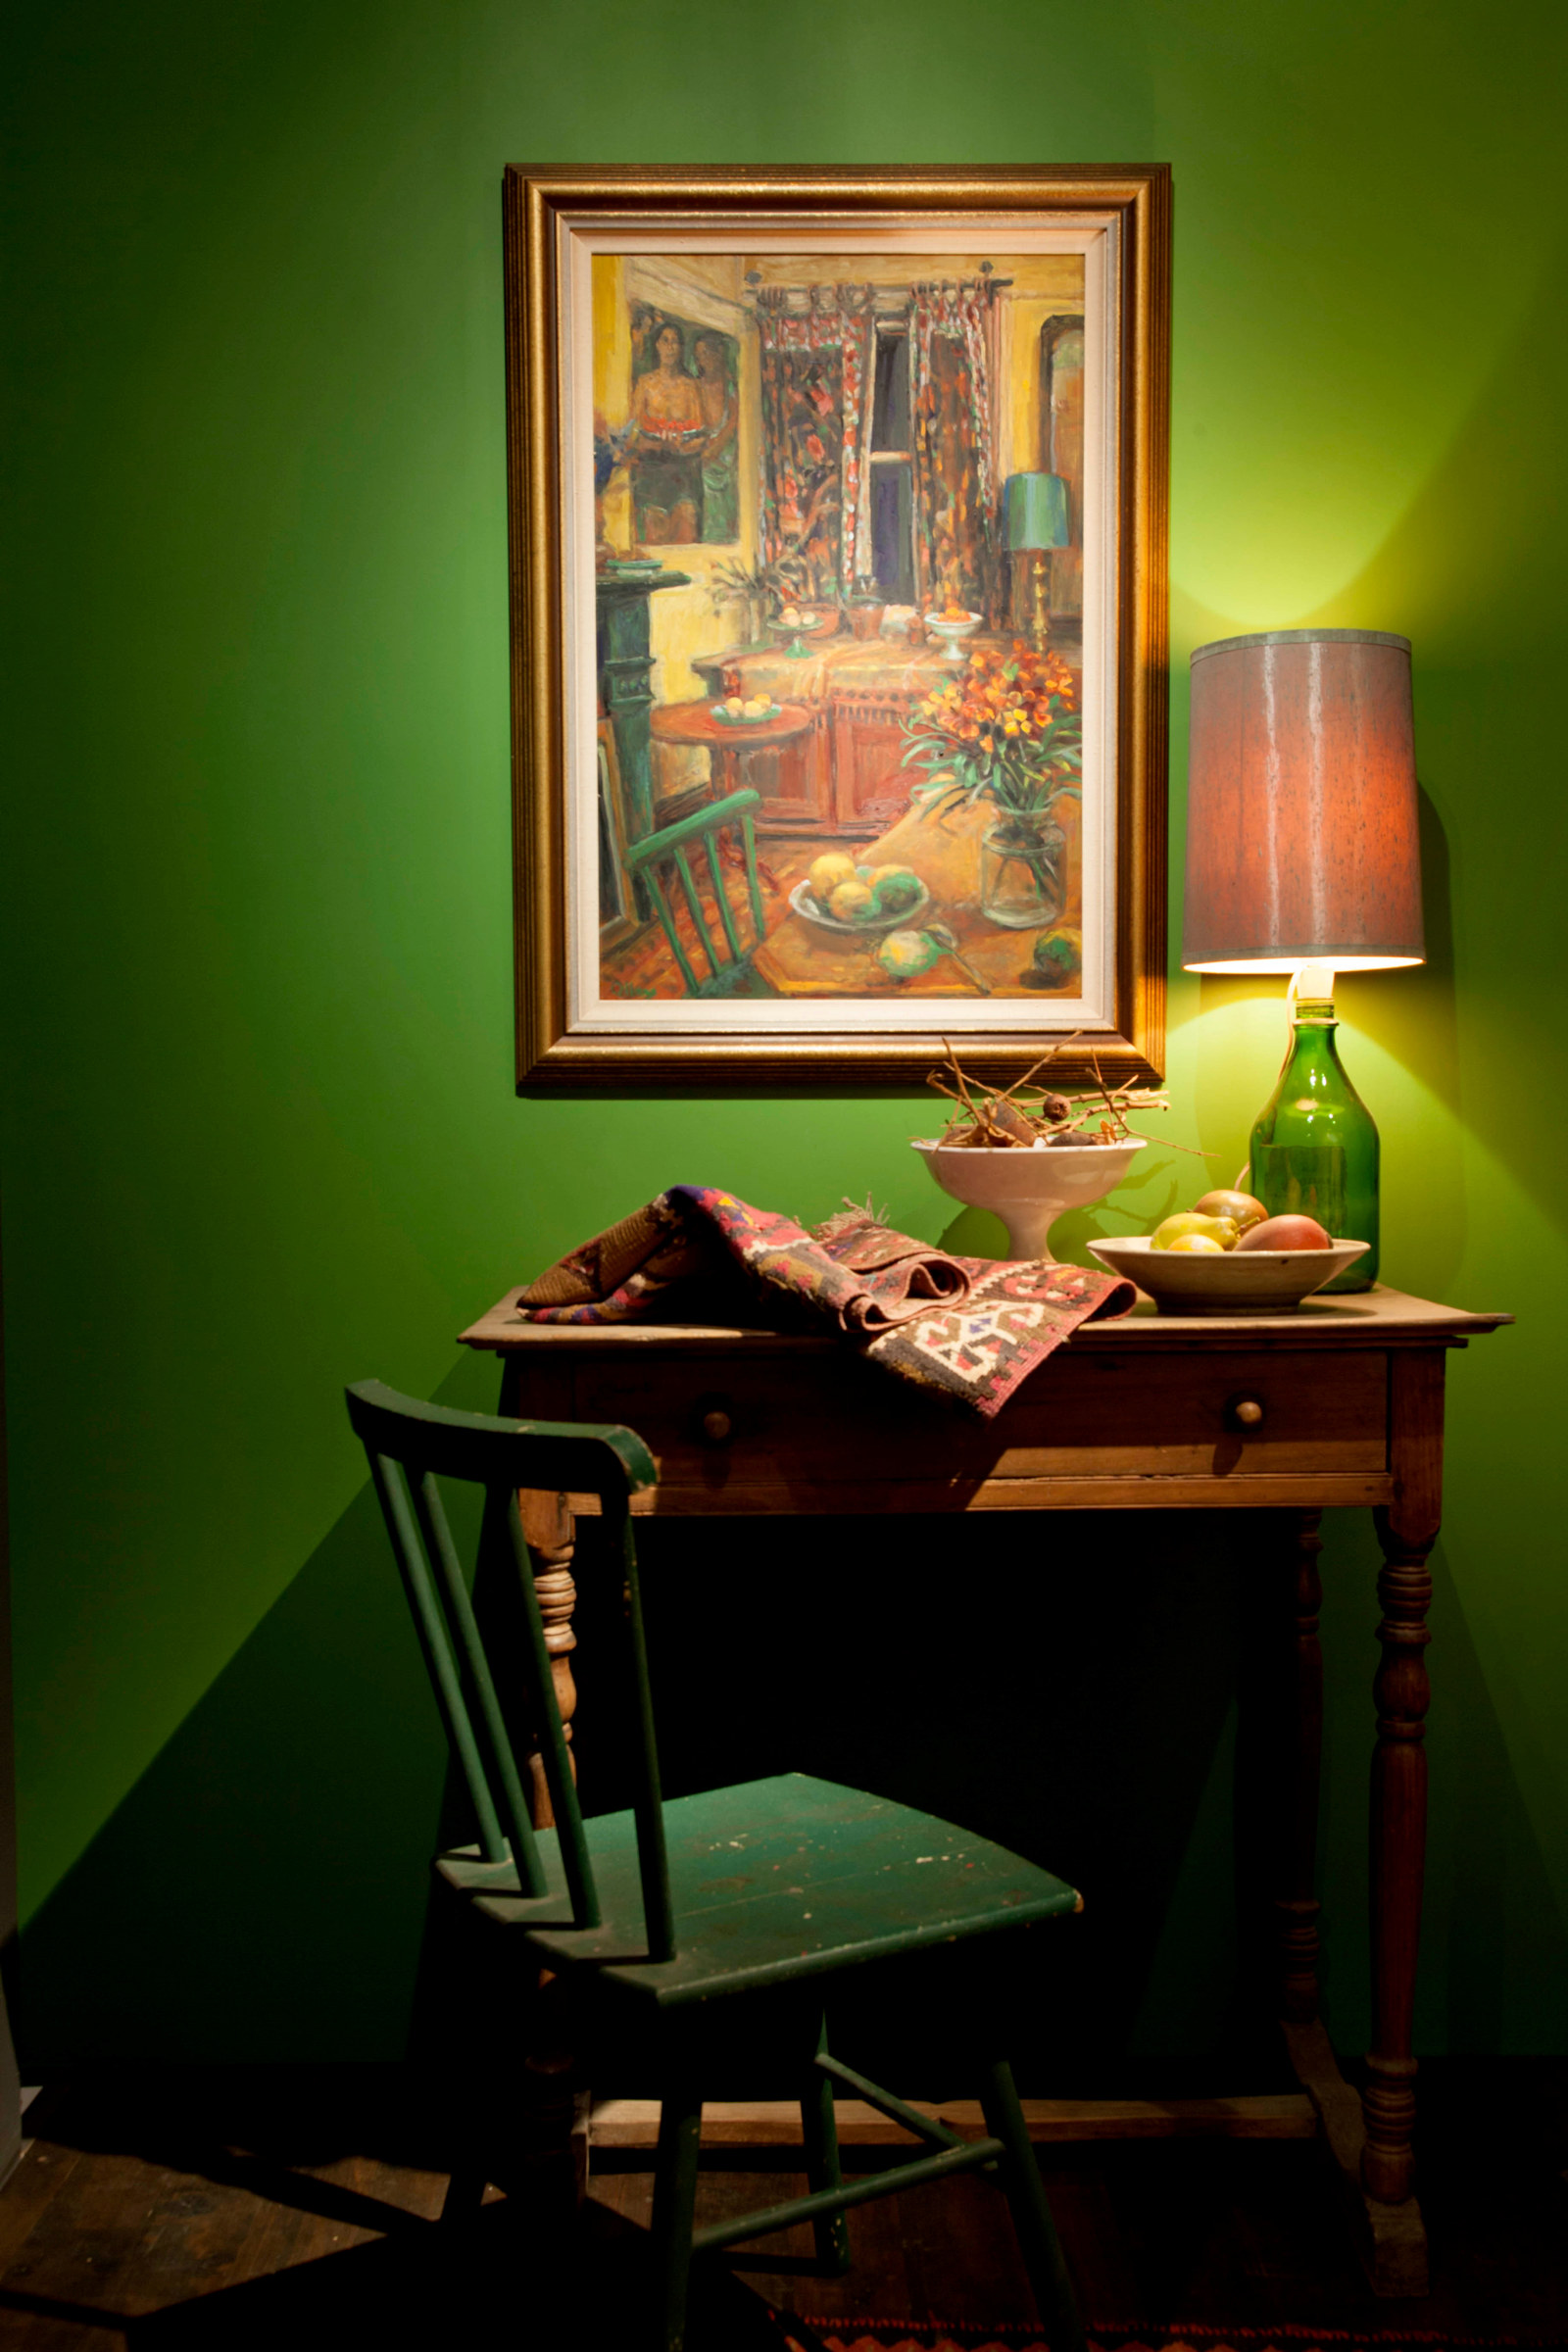 Shot of chair, desk and lamp against green wall with painting above.